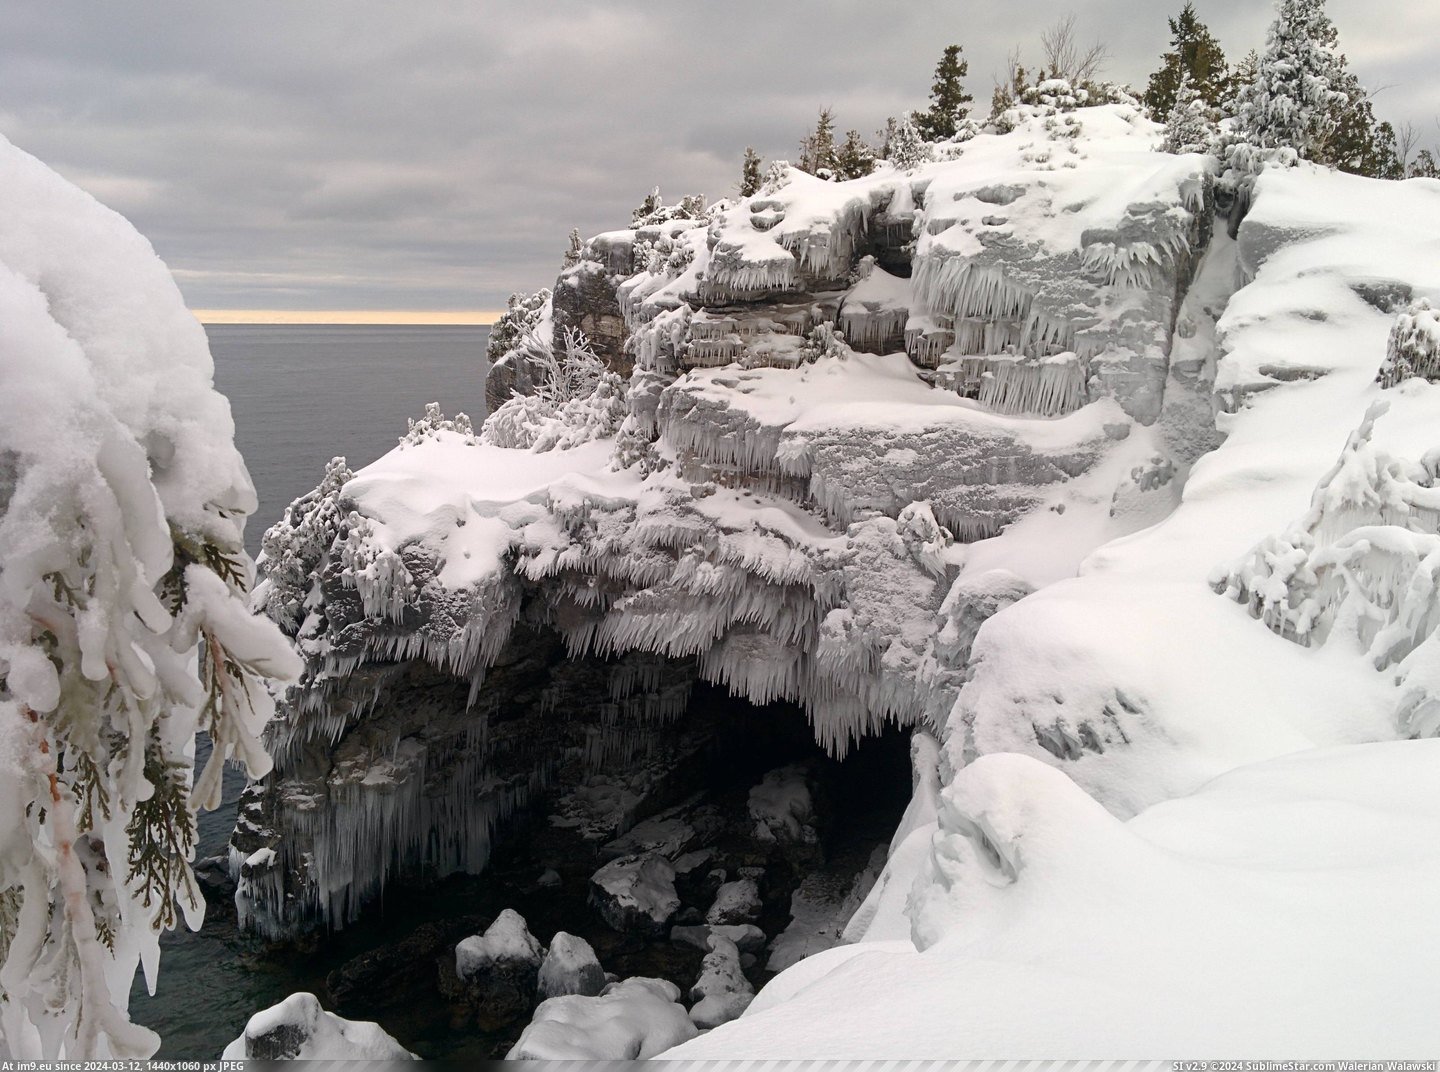 #Park #National #Ice #Bruce #Grotto #Ontario #Covered #Peninsula [Earthporn] The Ice-Covered Grotto, Bruce Peninsula National Park, Ontario CA [3200 × 2368] [OC] Pic. (Изображение из альбом My r/EARTHPORN favs))